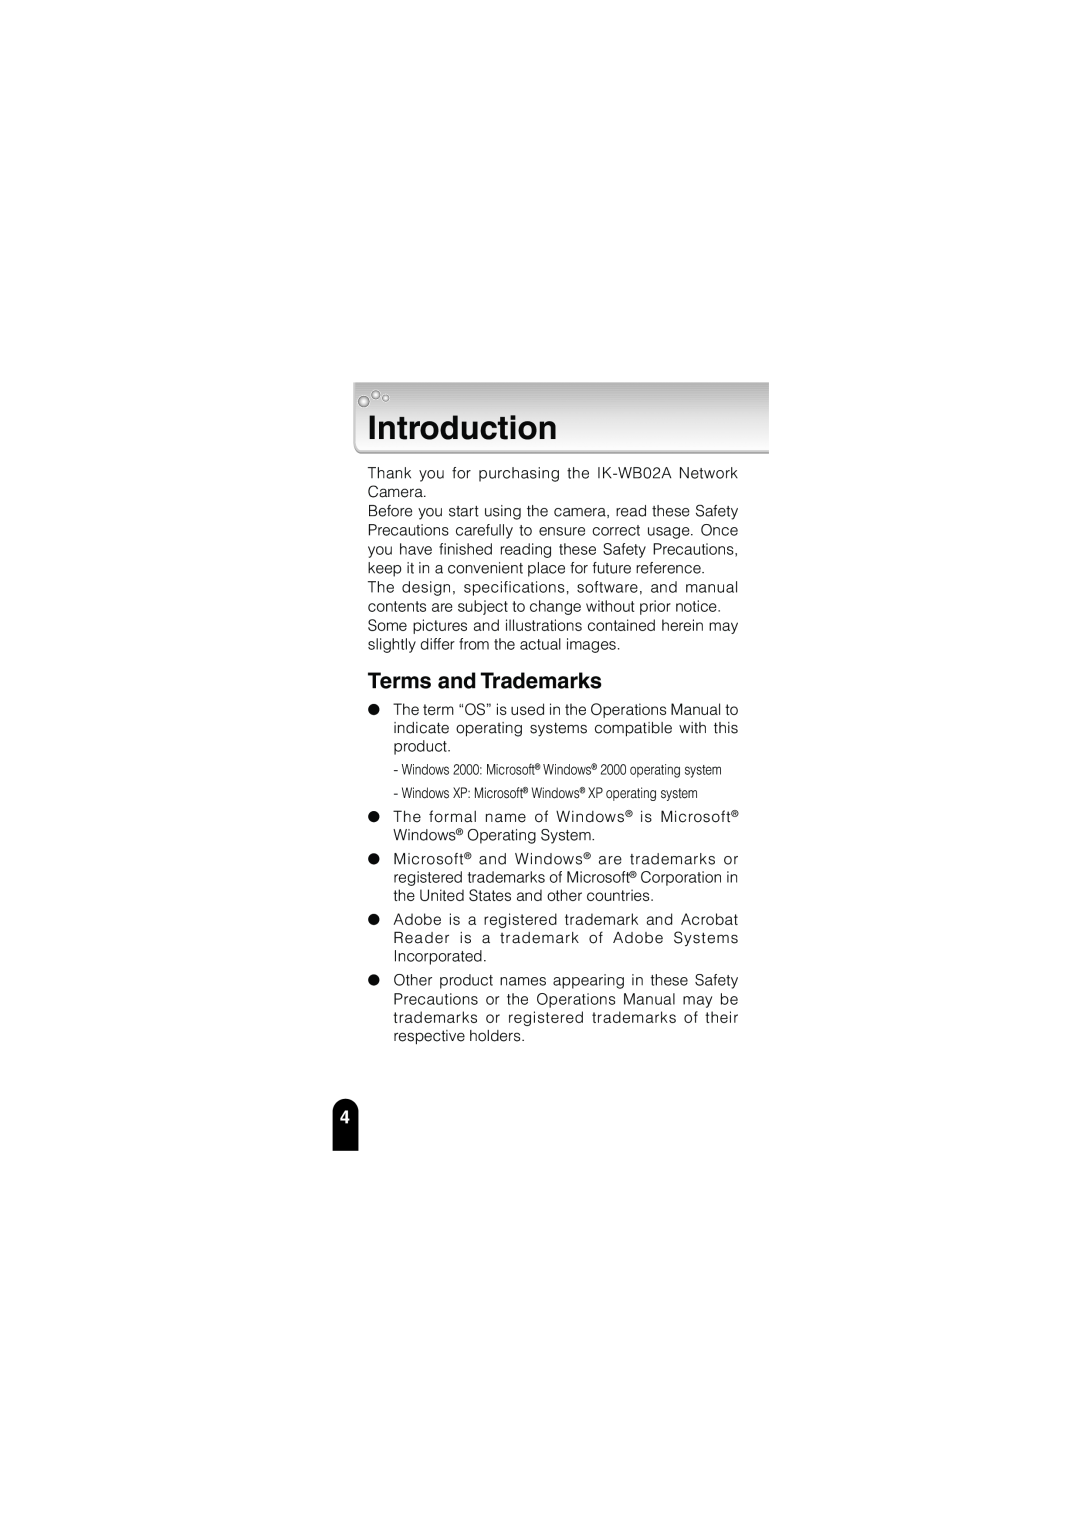 Toshiba IK-WB02A manual Introduction, Terms and Trademarks 